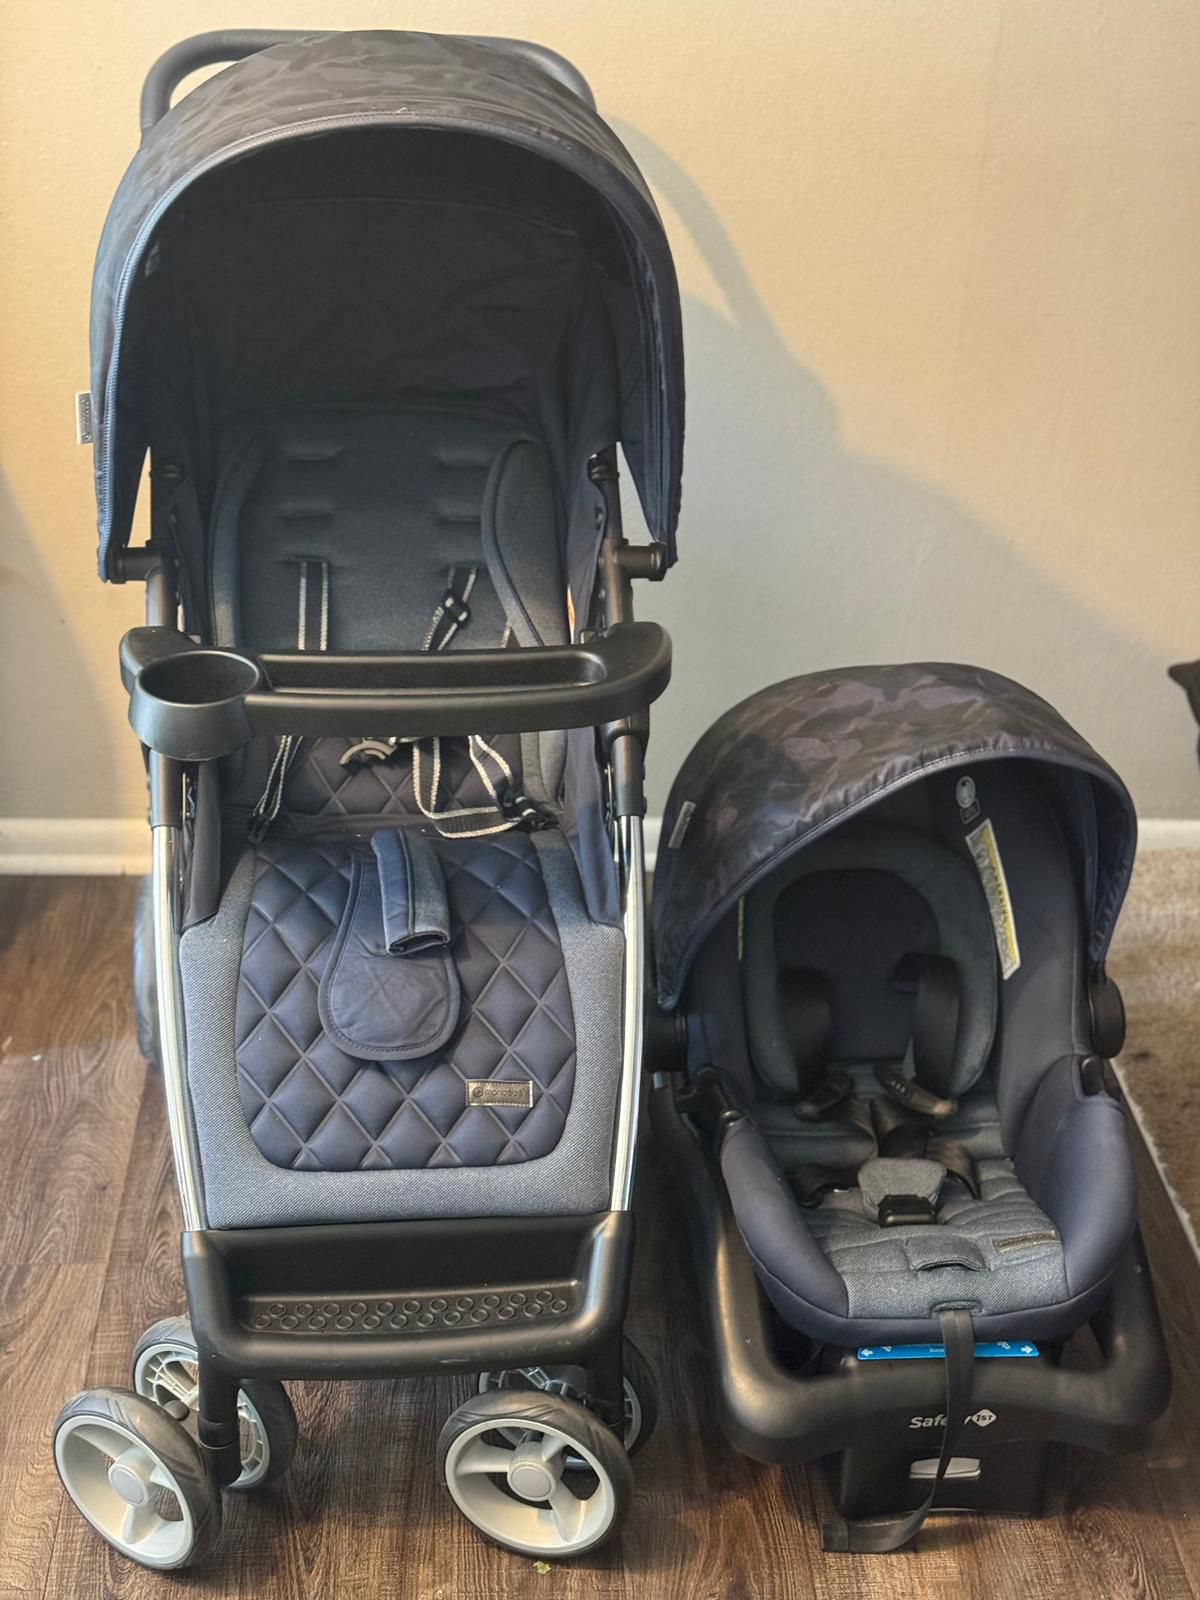 Baby Car Seat And Stroller Set $110